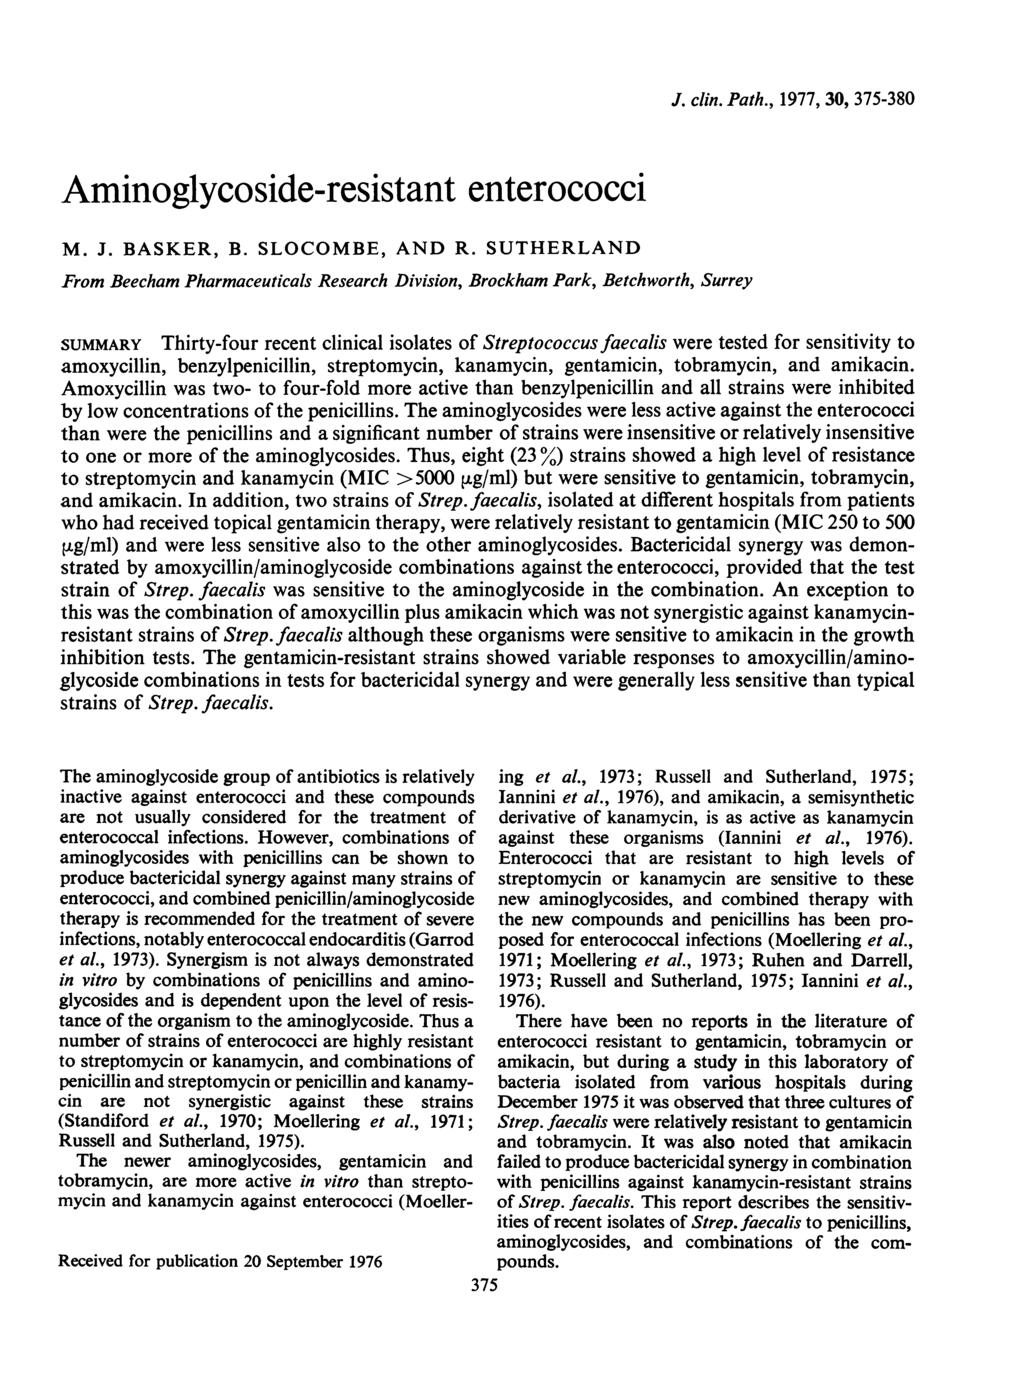 Aminoglycoside-resistant enterococci M. J. BASKER, B. SLOCOMBE, AND R. SUTHERLAND From Beecham Pharmaceuticals Research Division, Brockham Park, Betchworth, Surrey J. clin. Path.